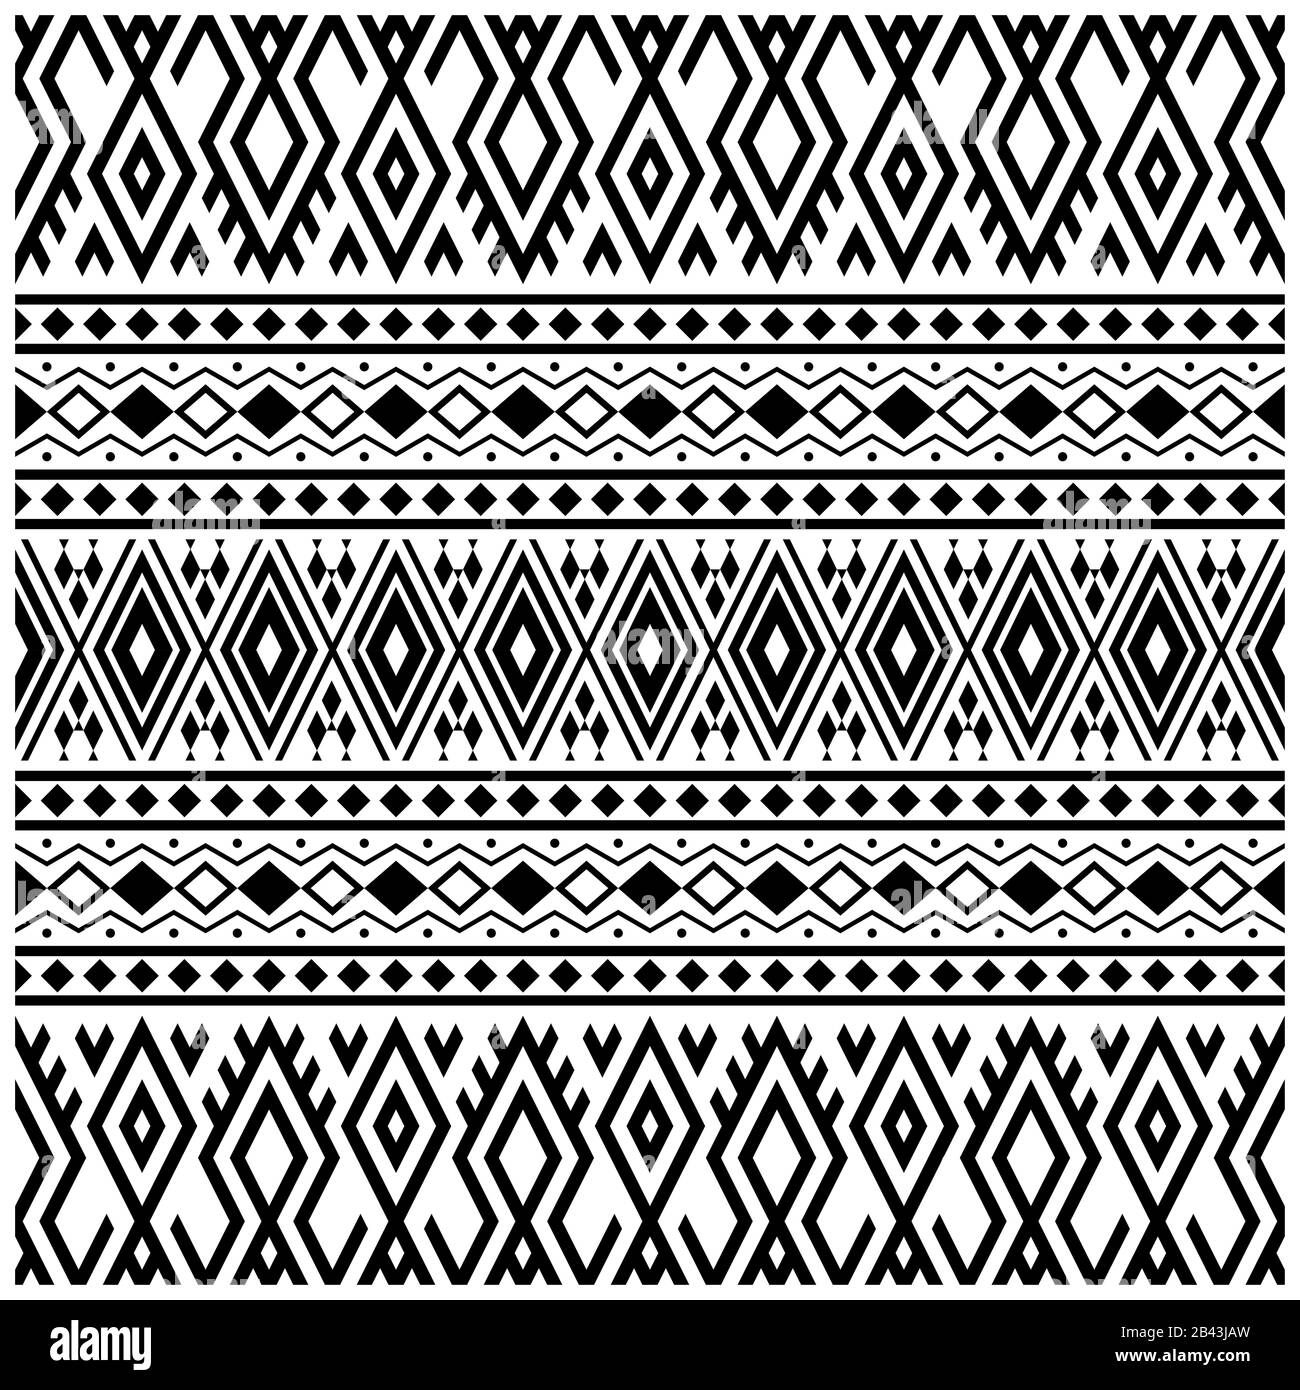 Aztec ethnic seamless pattern design in black and white color. Tribal ...